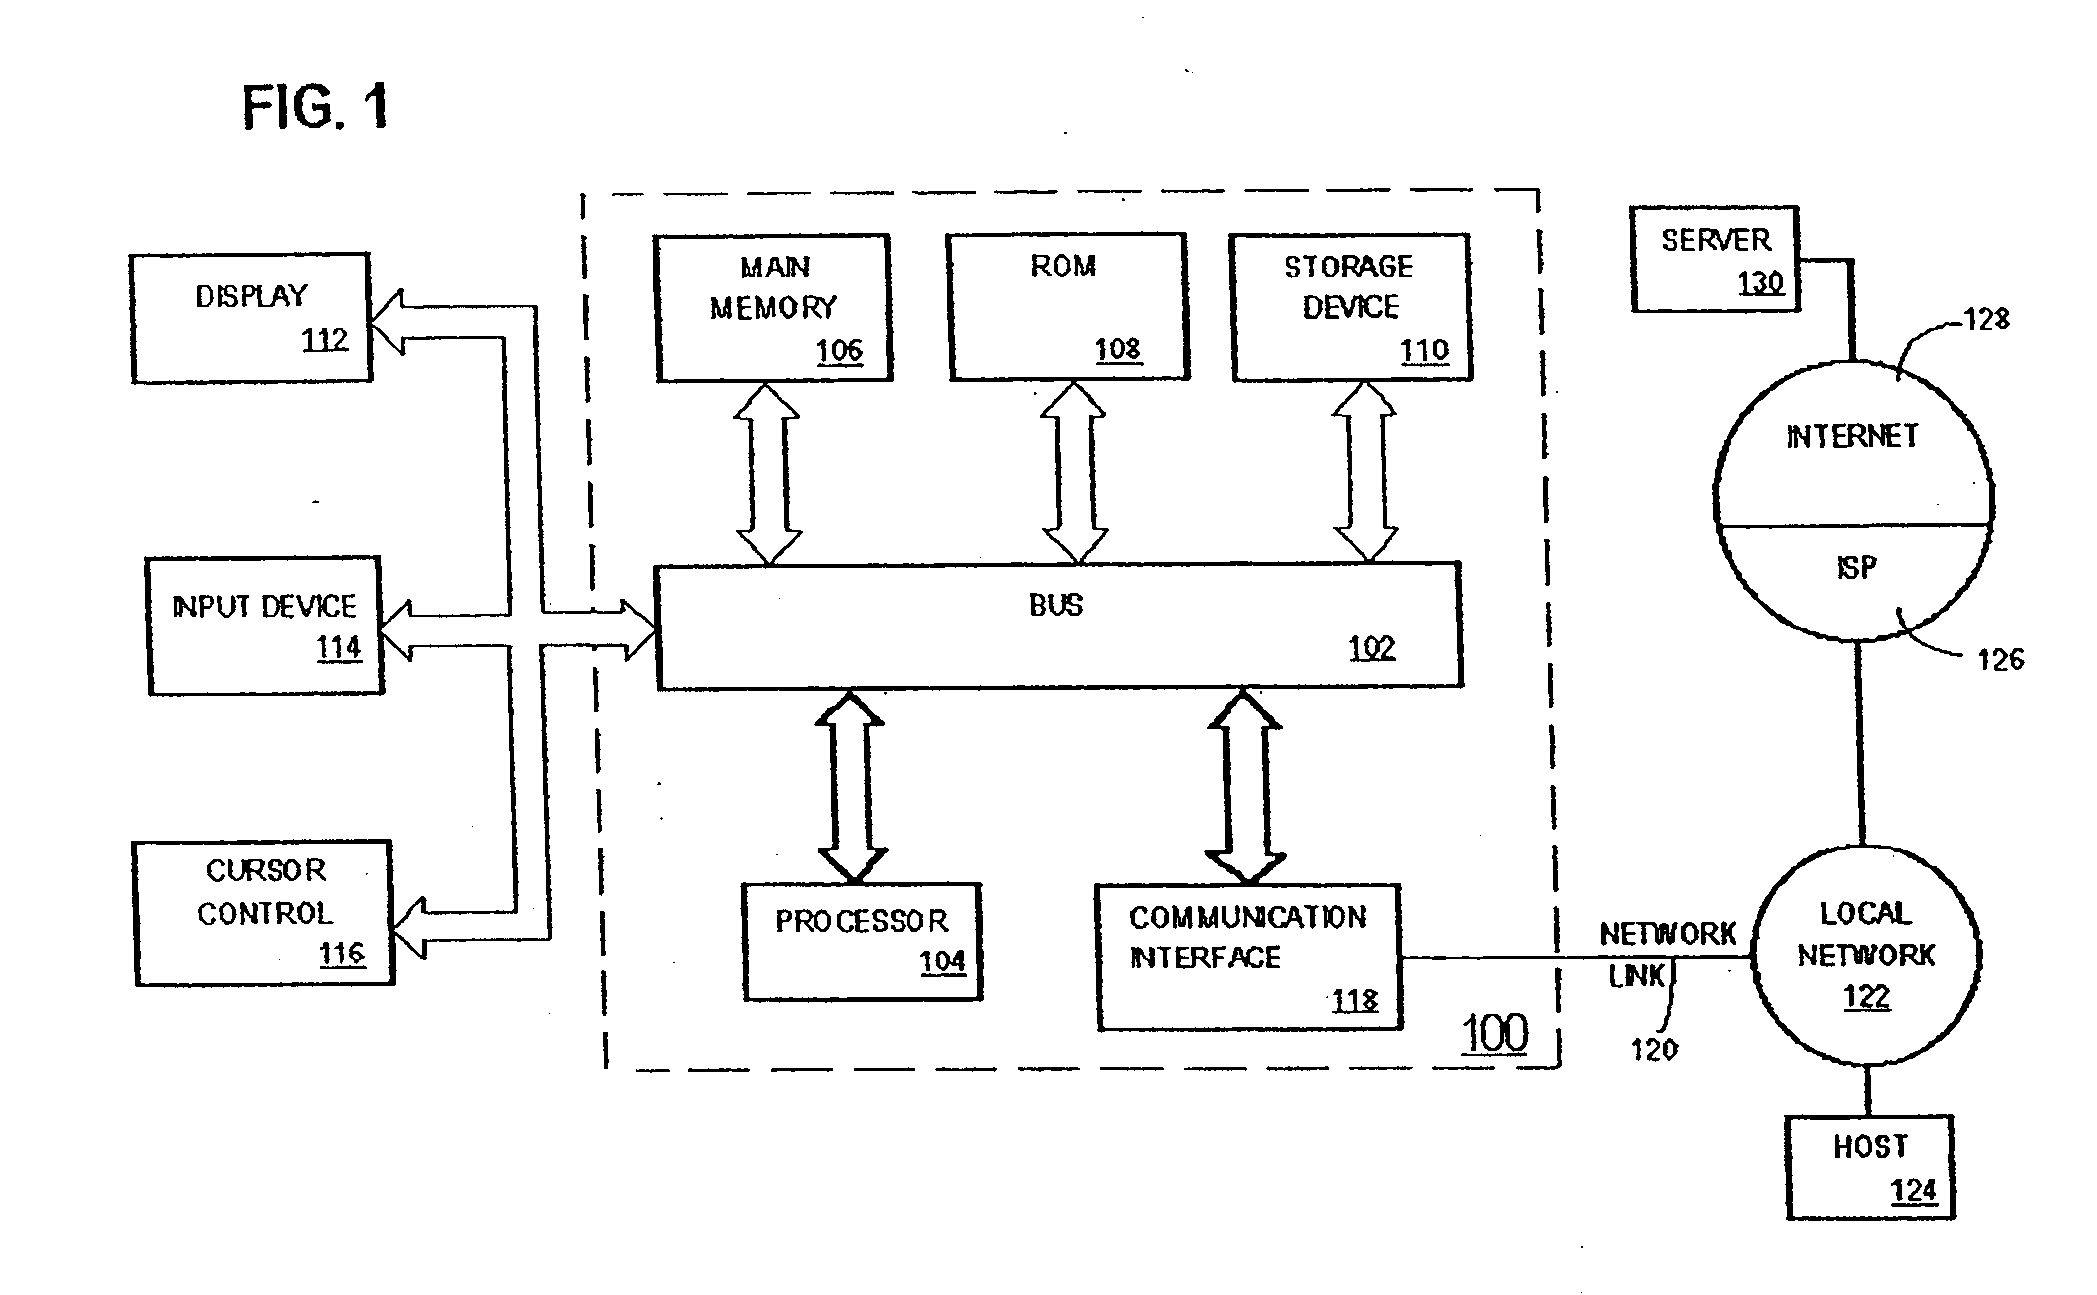 Systems and methods for automatic generation, registration and mobile phone billing of a pod using third party web page content